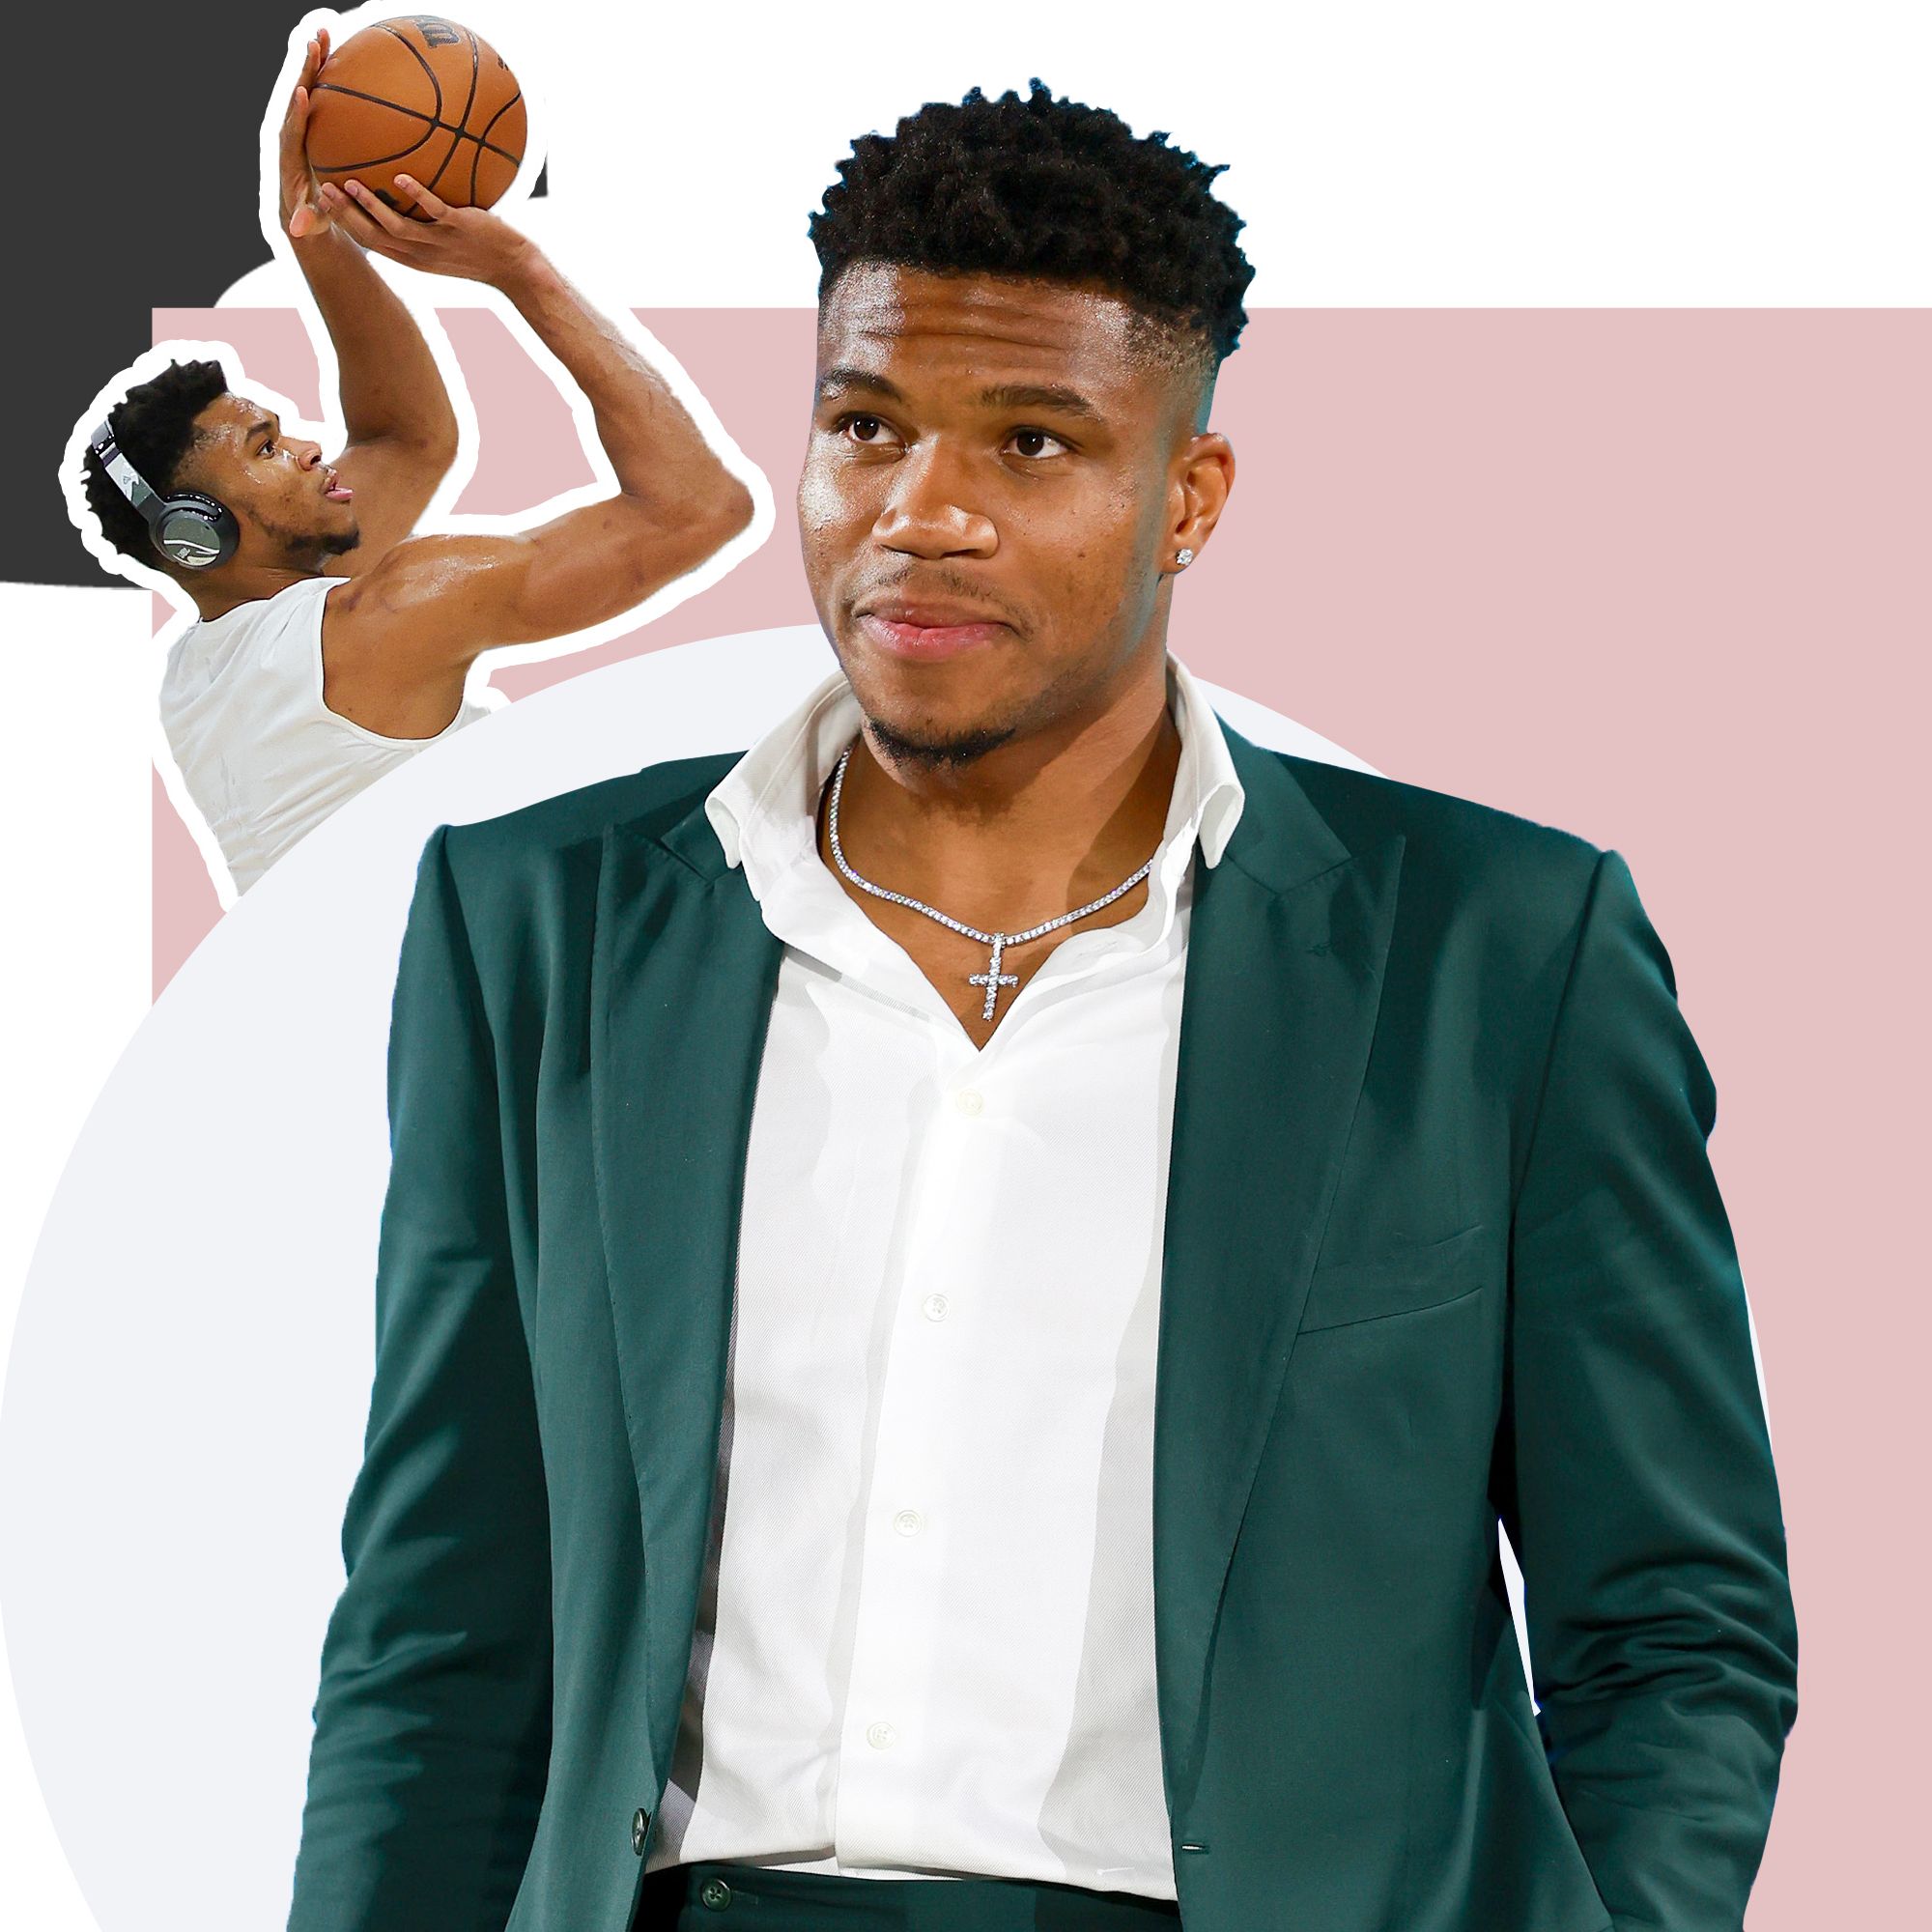 Giannis Antetokounmpo Wanted to Wear Sweats to the NBA Draft